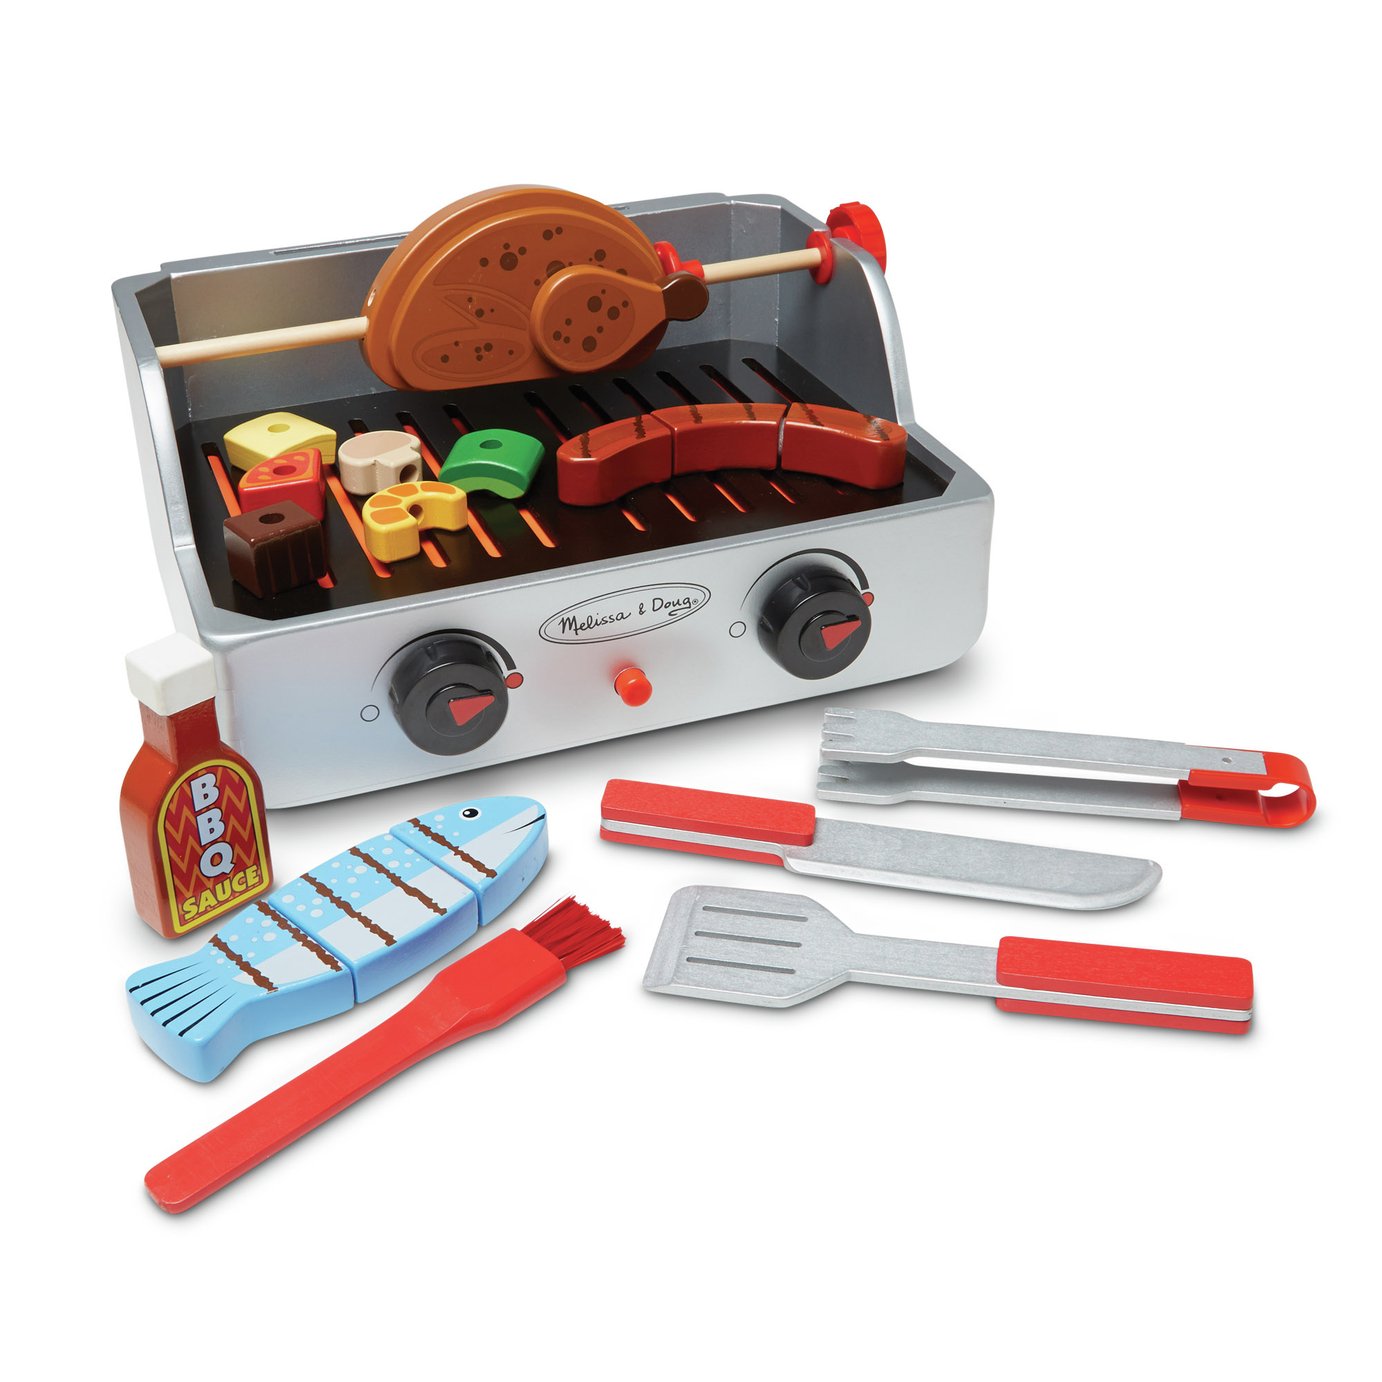 Melissa & Doug Deluxe Wooden Barbecue Play Set Review